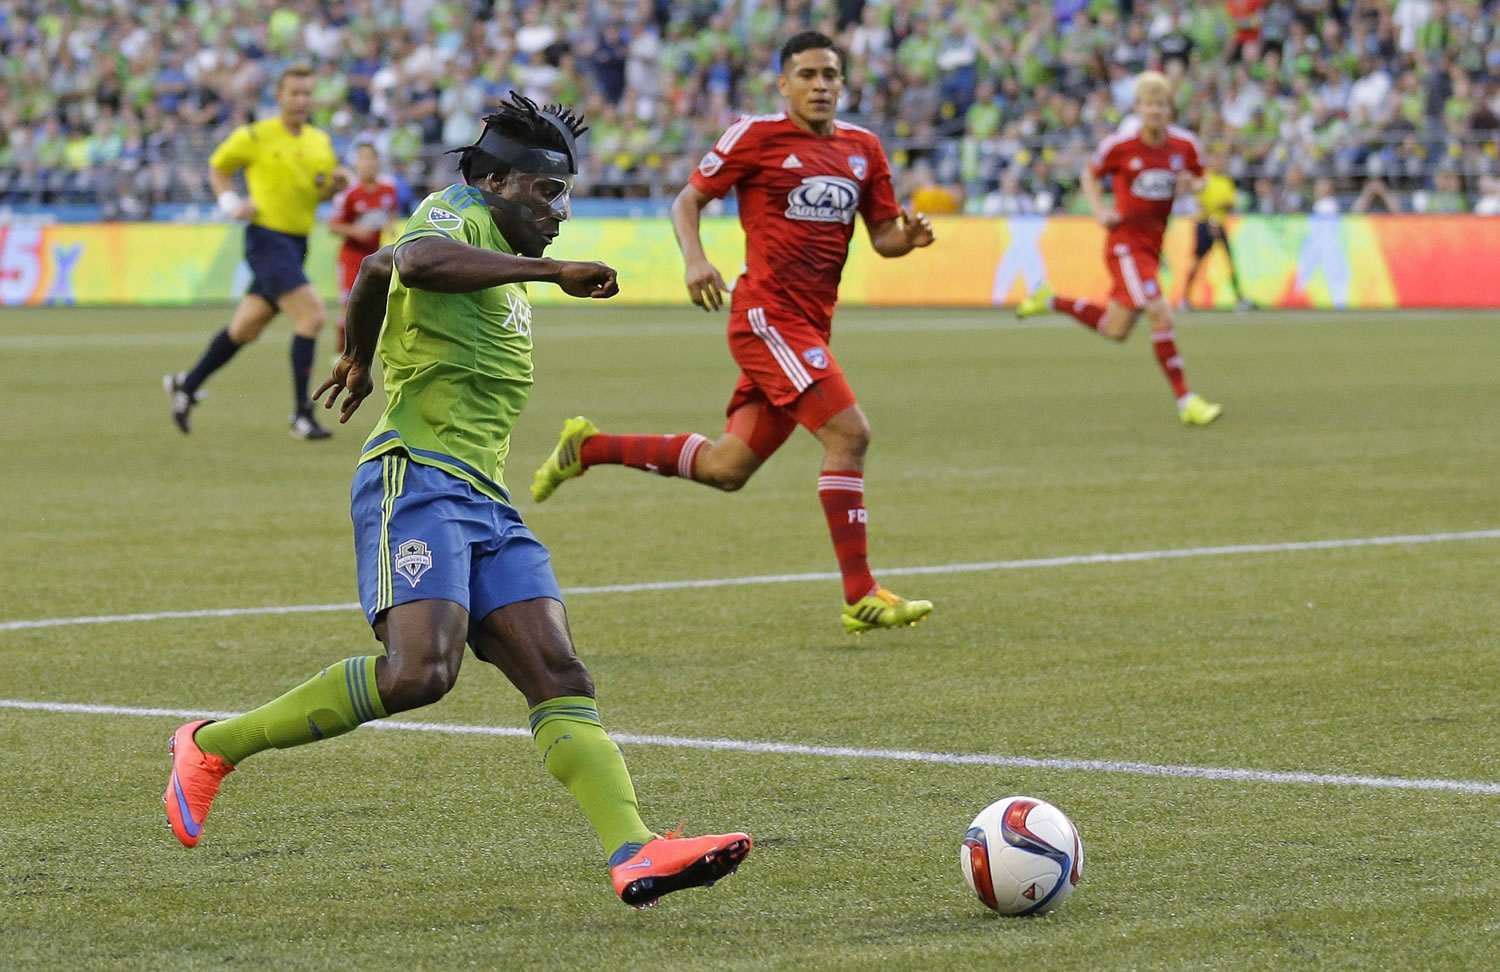 Seattle Sounders' Obafemi Martins, left, wearing a protective mask, goes in for a shot against FC Dallas during the second half Saturday, June 13, 2015, in Seattle. The Sounders won 3-0. (AP Photo/Ted S.